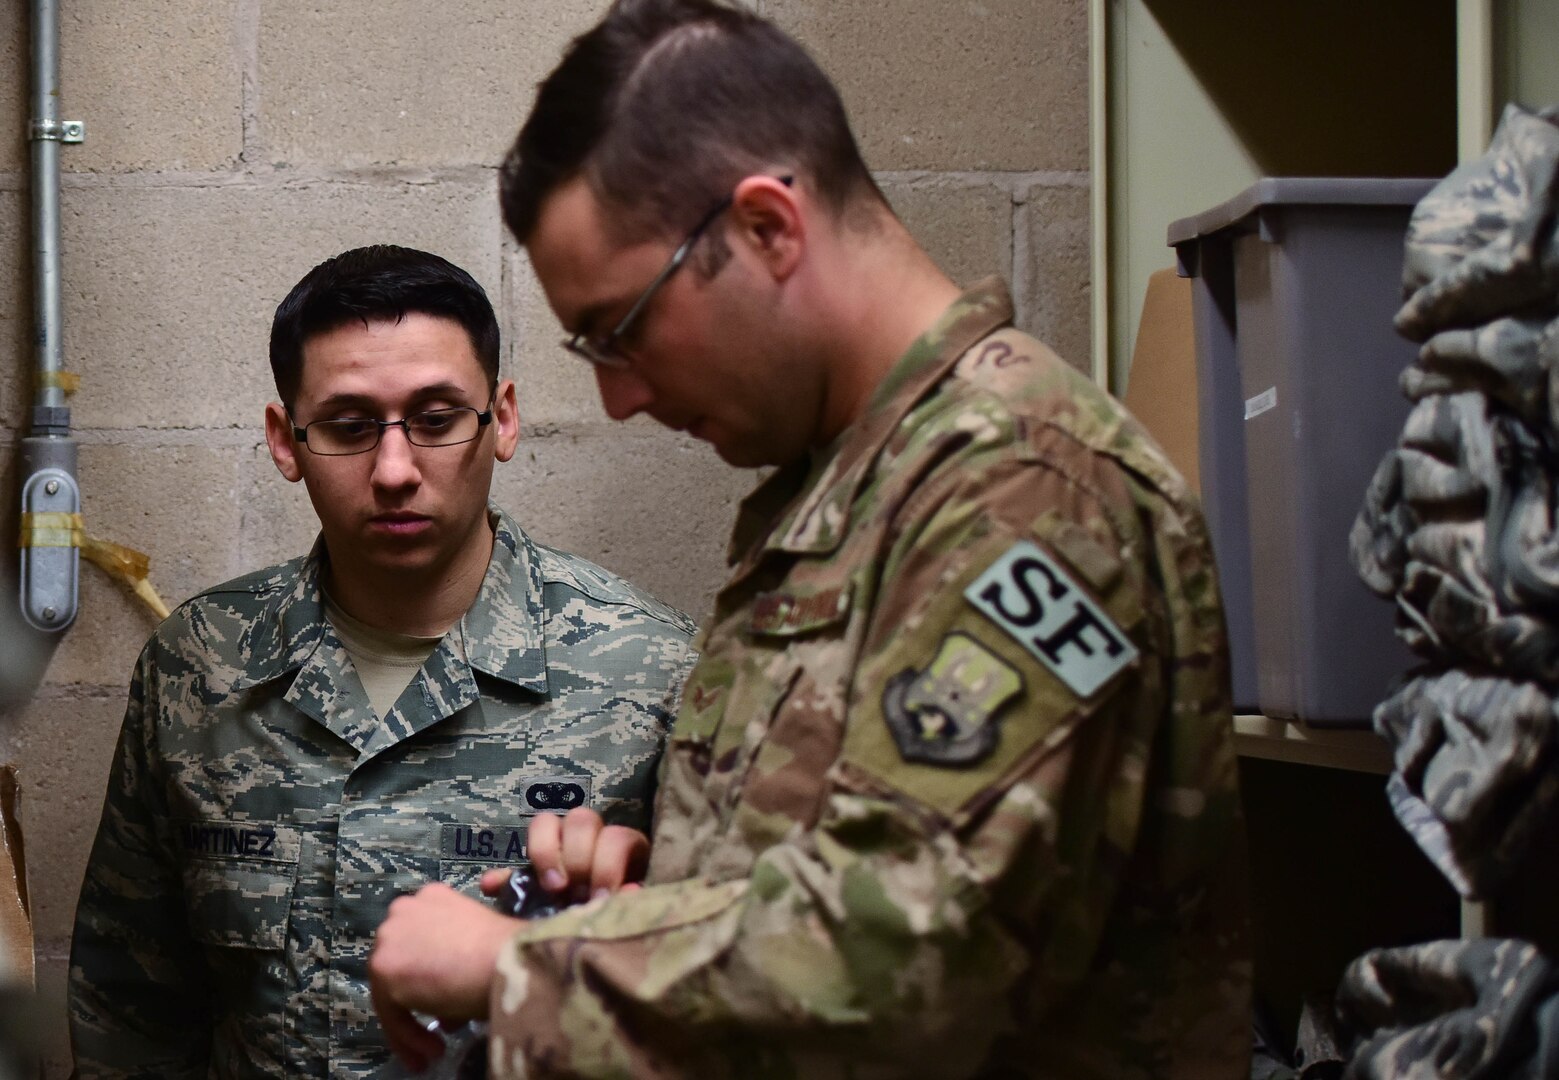 U.S. Air Force Senior Airman Michael Craig, 20th Security Forces Squadron (SFS) installation patrolman, right, inspects an item for serviceability as Staff Sgt. Justin Martinez, 20th SFS unit deployment manager, watches at Shaw Air Force Base, S.C., March 29, 2018.